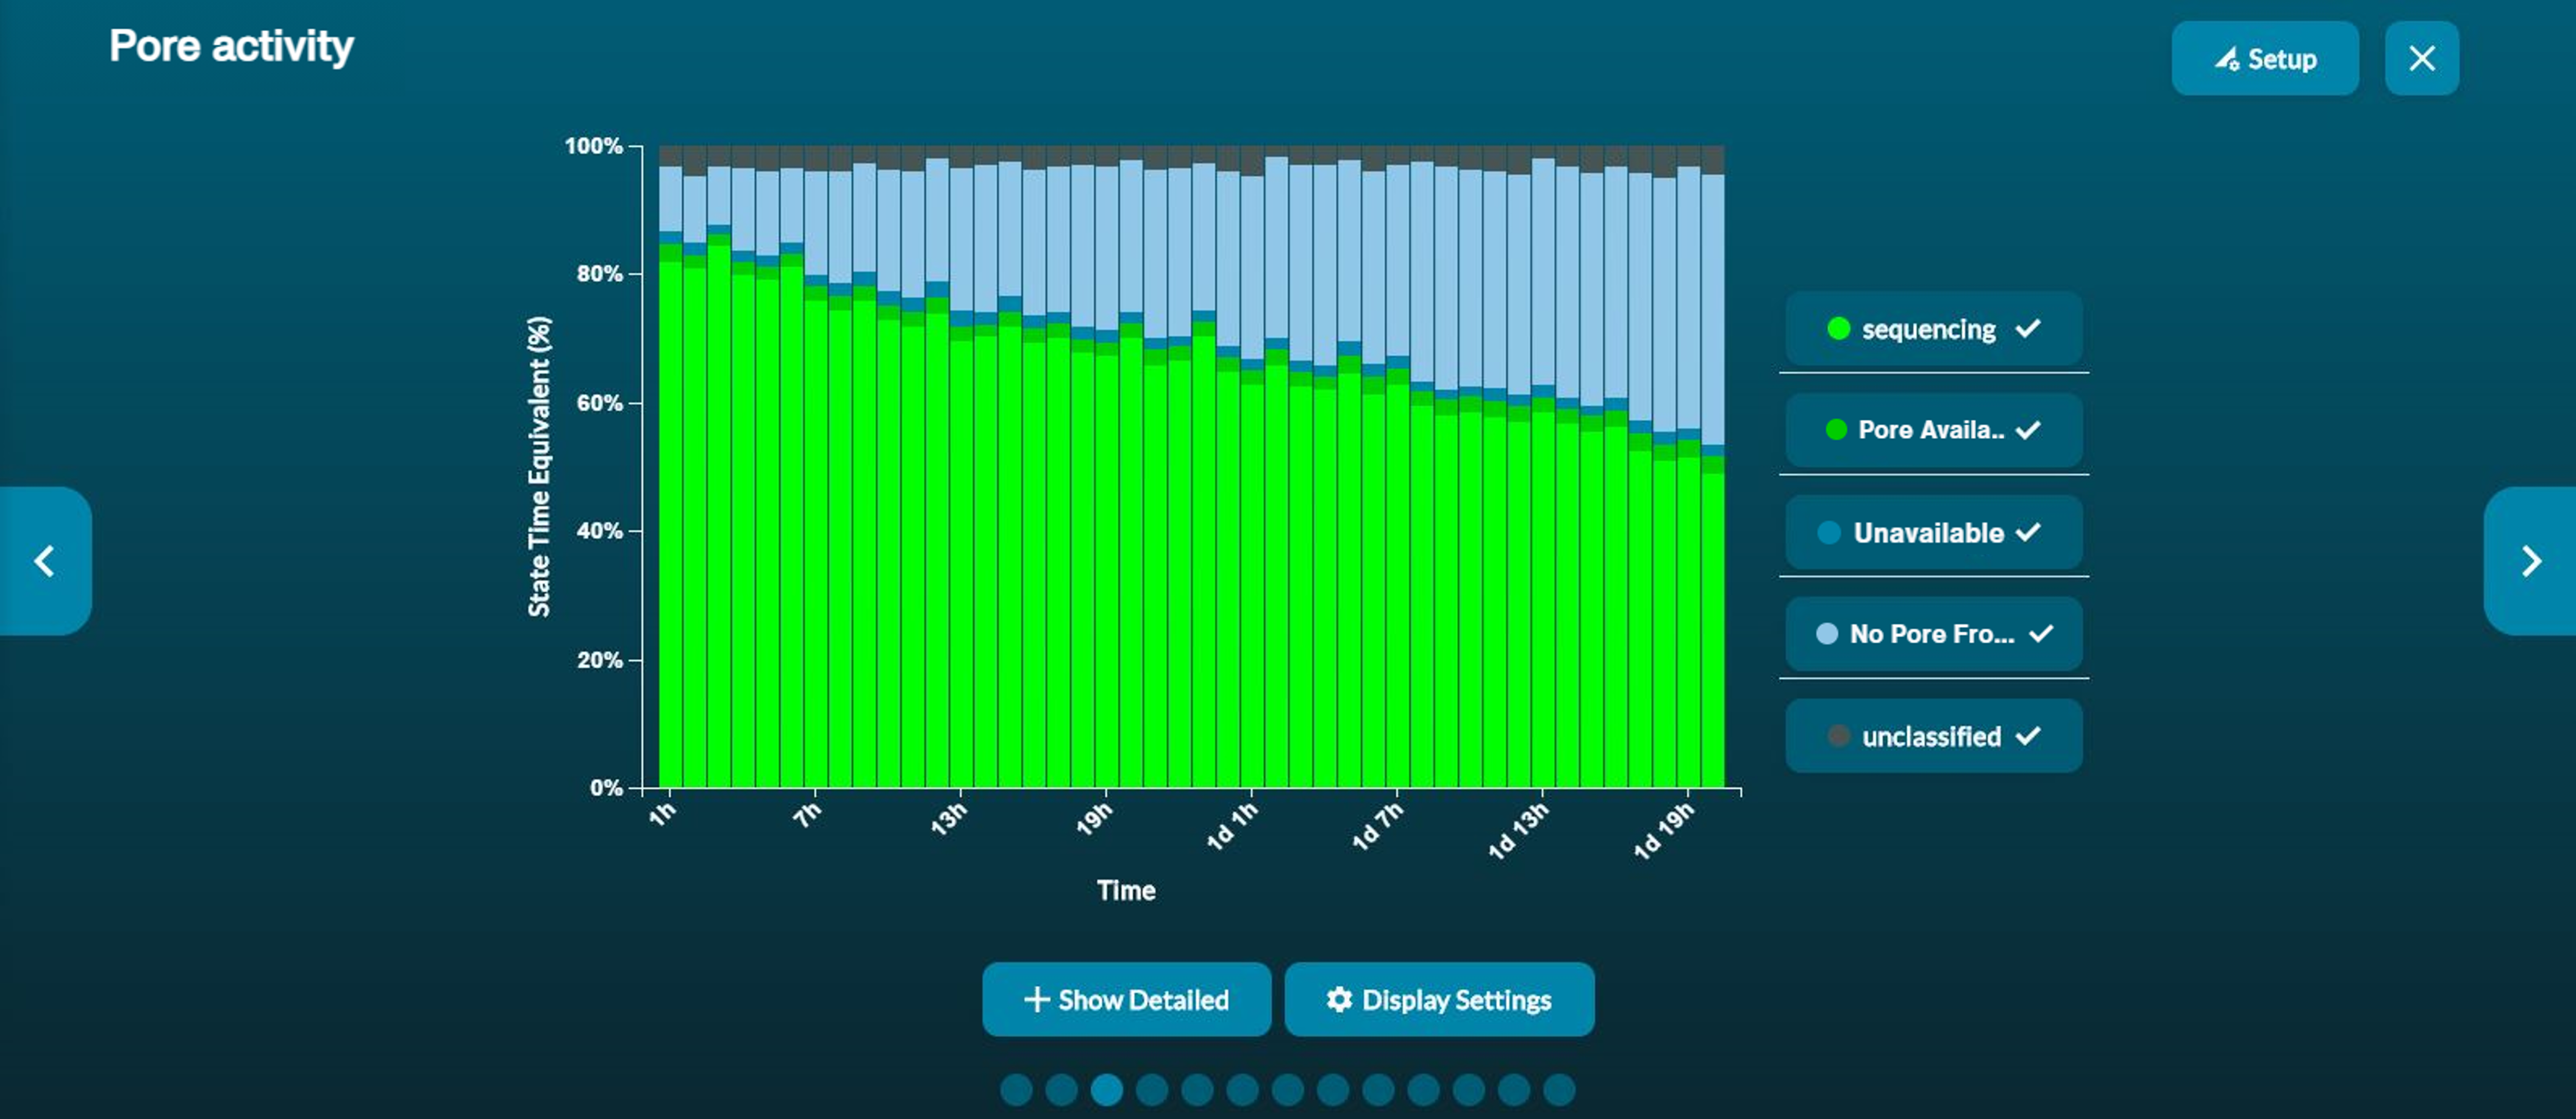 Pore activity GUI updated graph